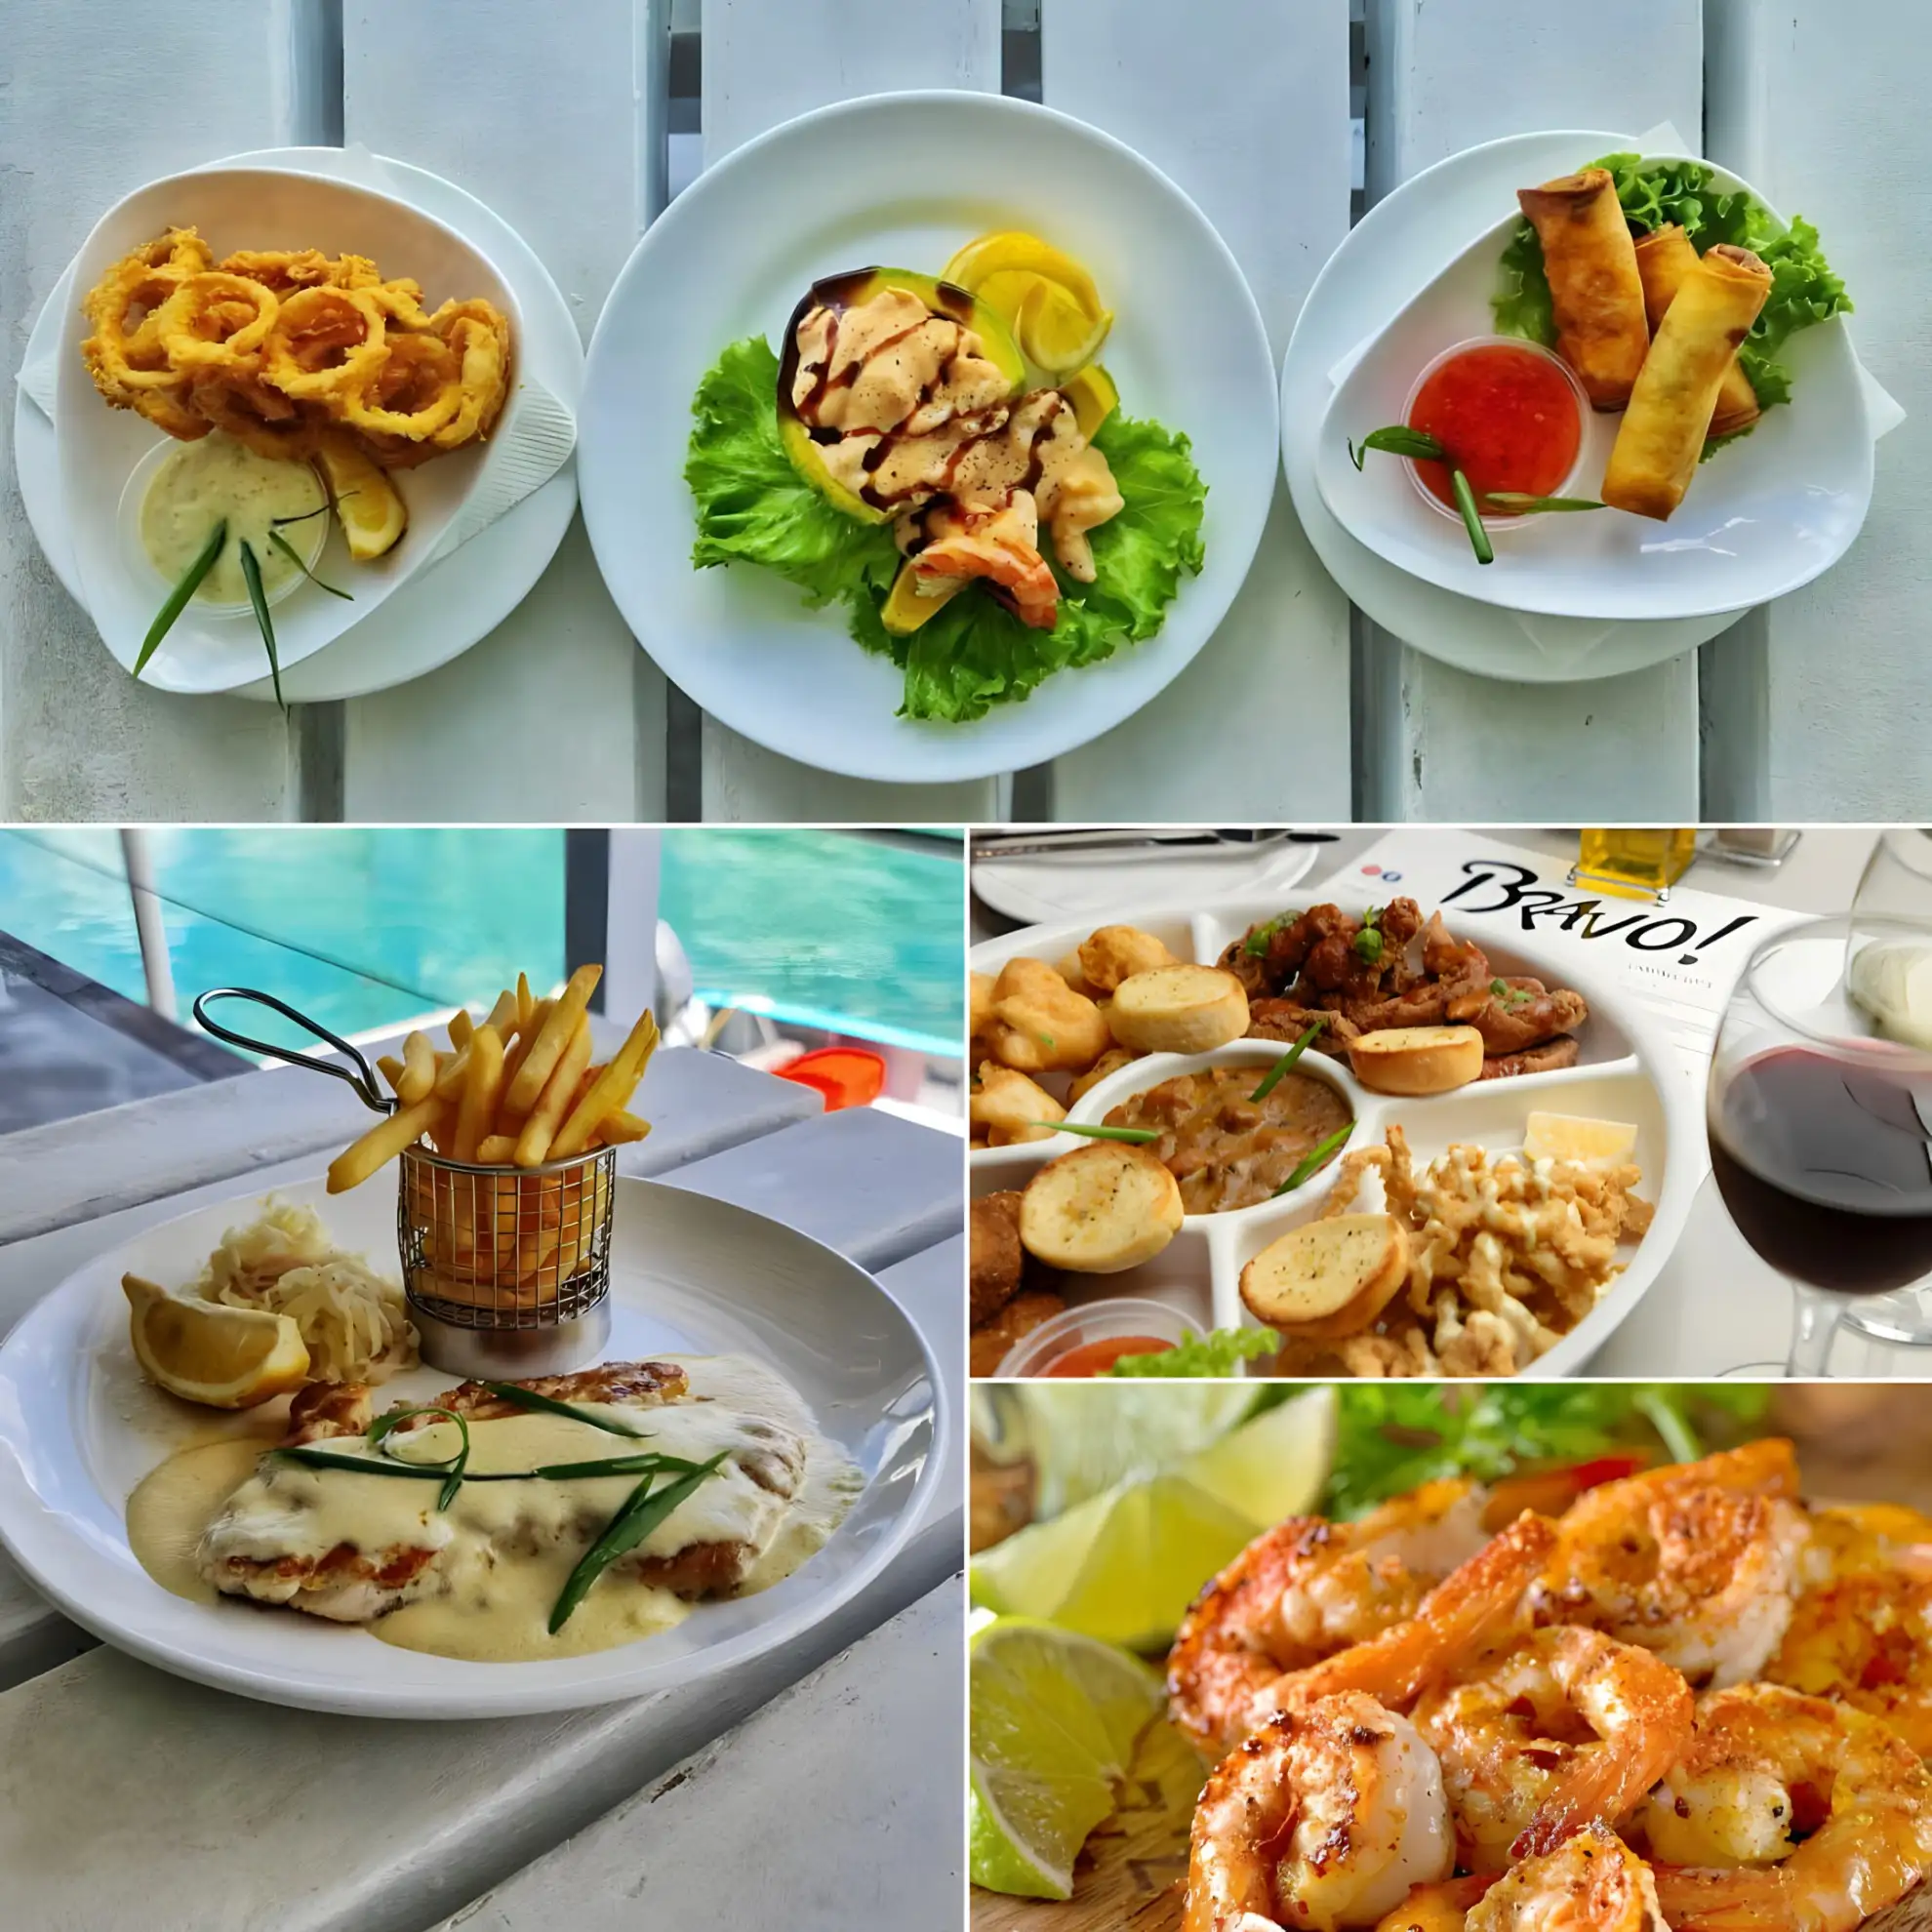 Bravo restaurant entices with a diverse menu of local and international delicacies served generously.